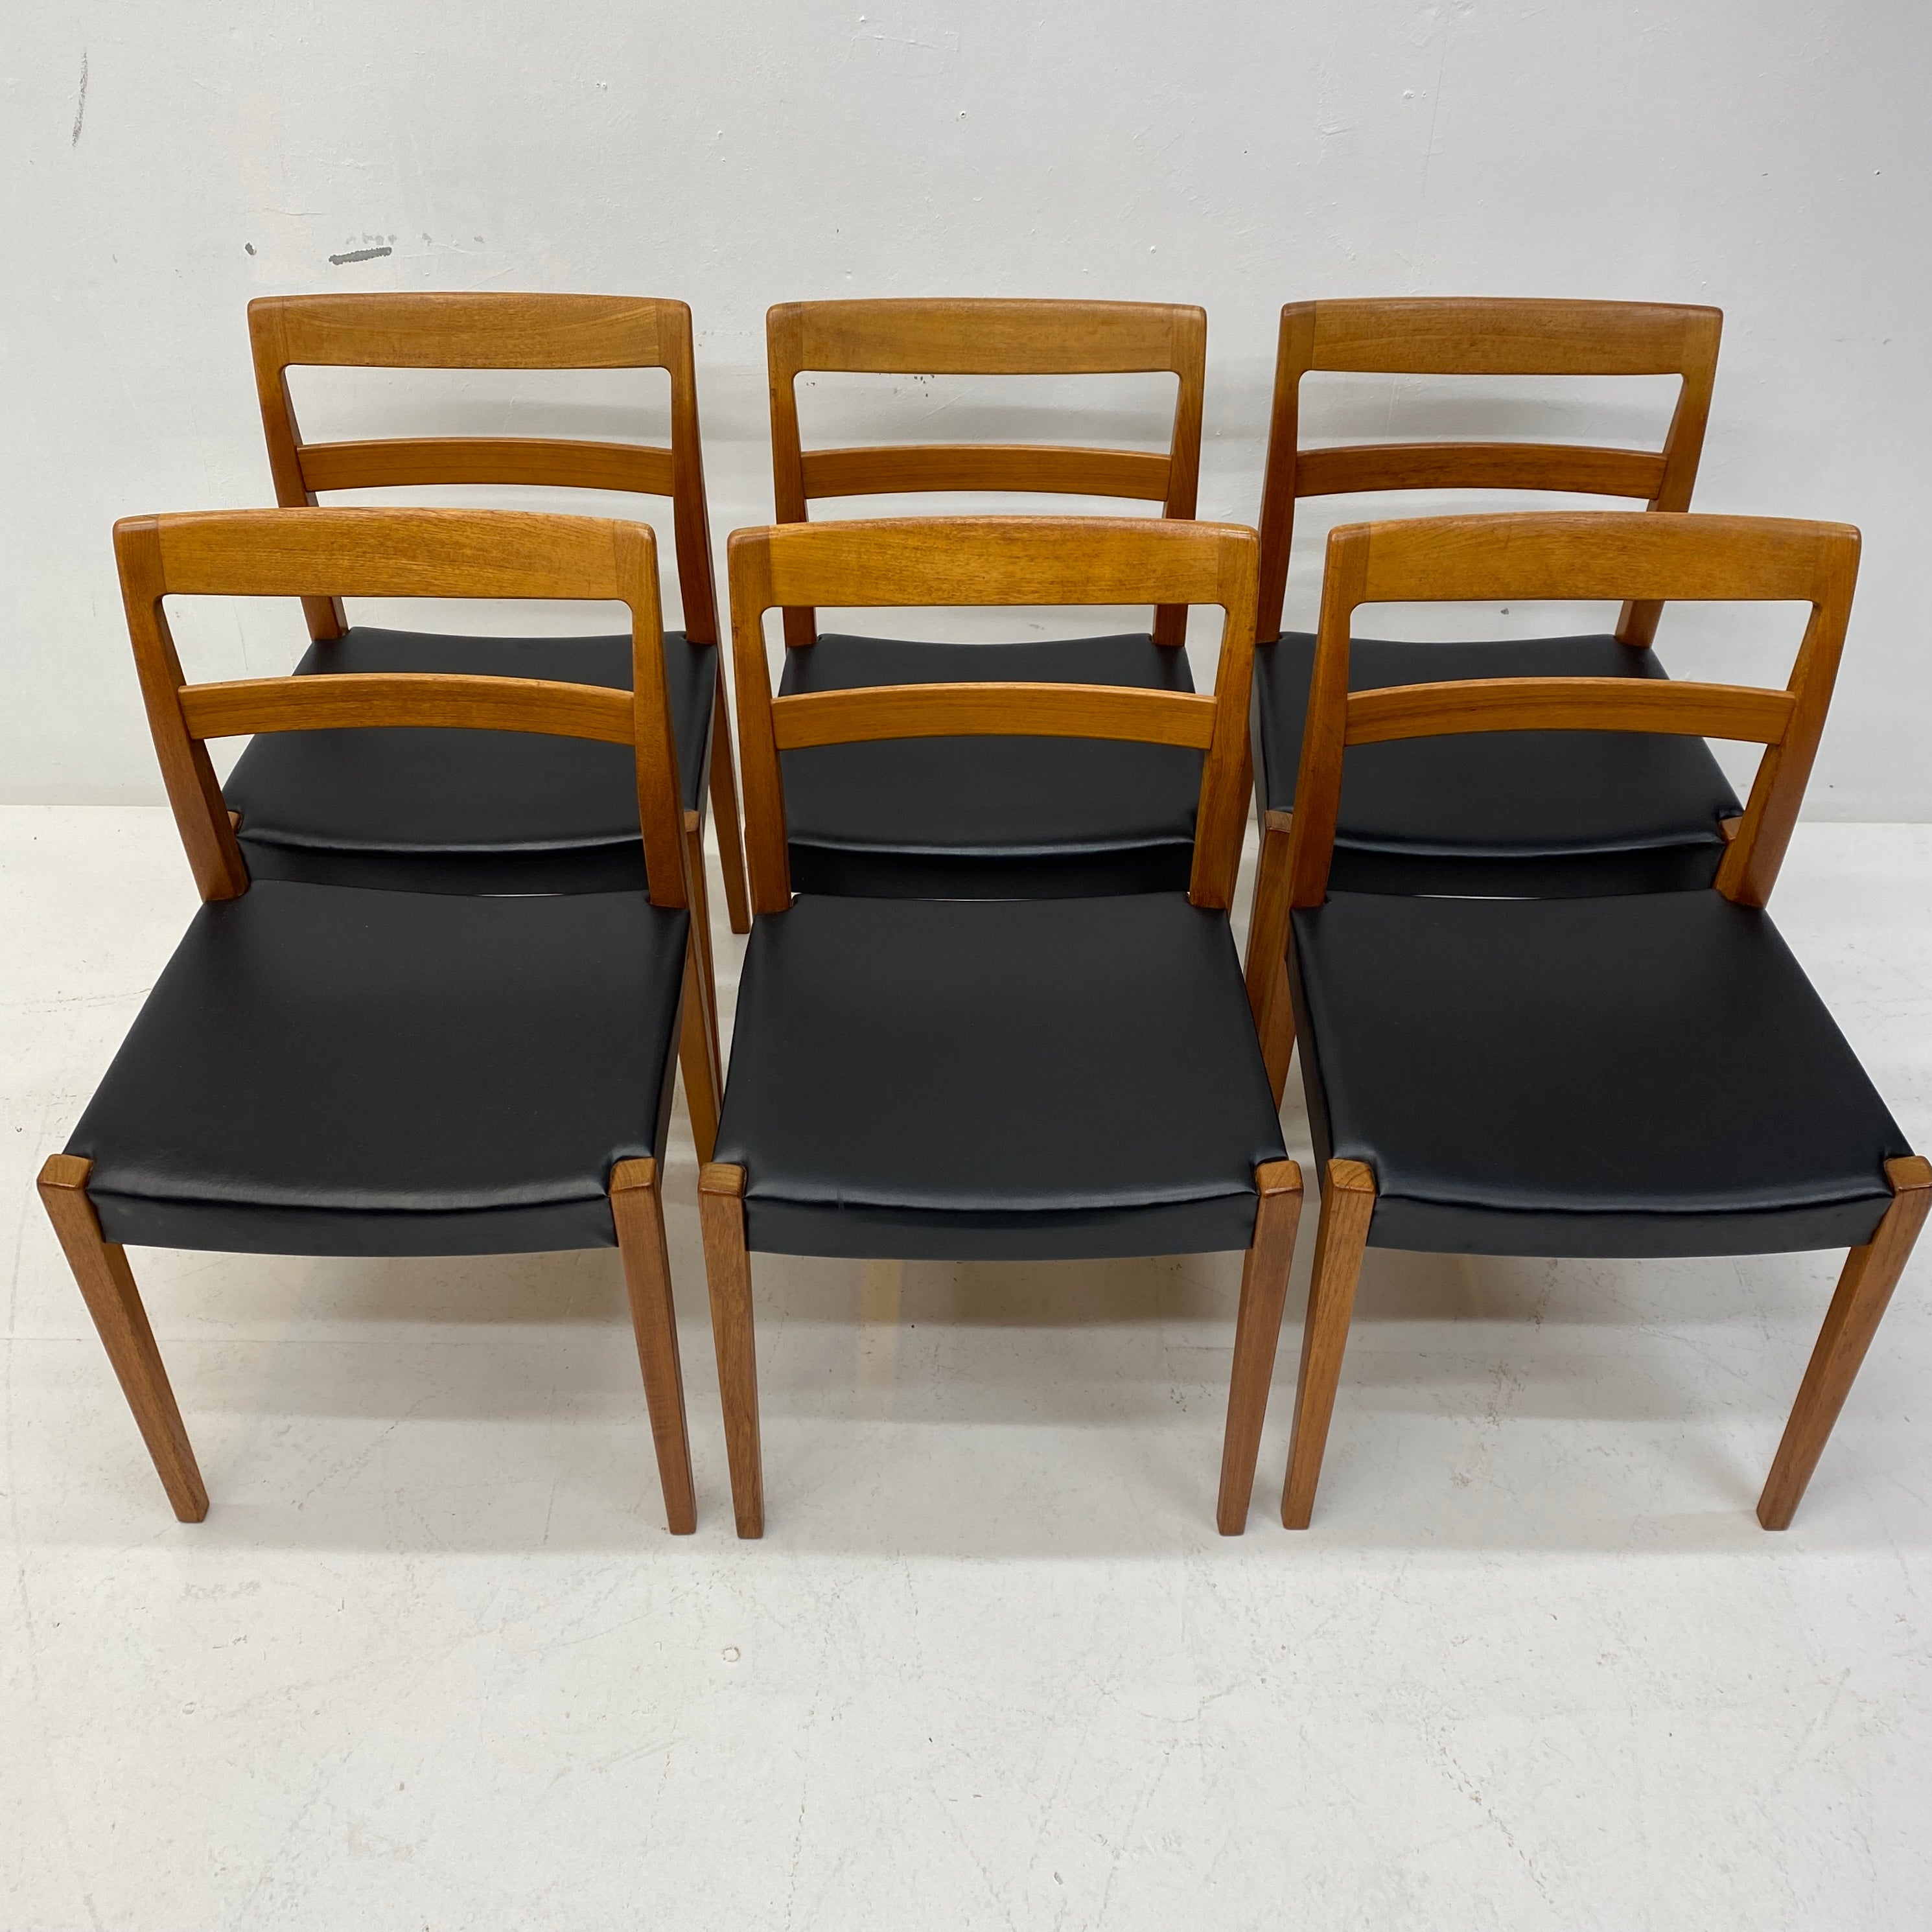 Top Of Nils Jonsson Dining Chairs